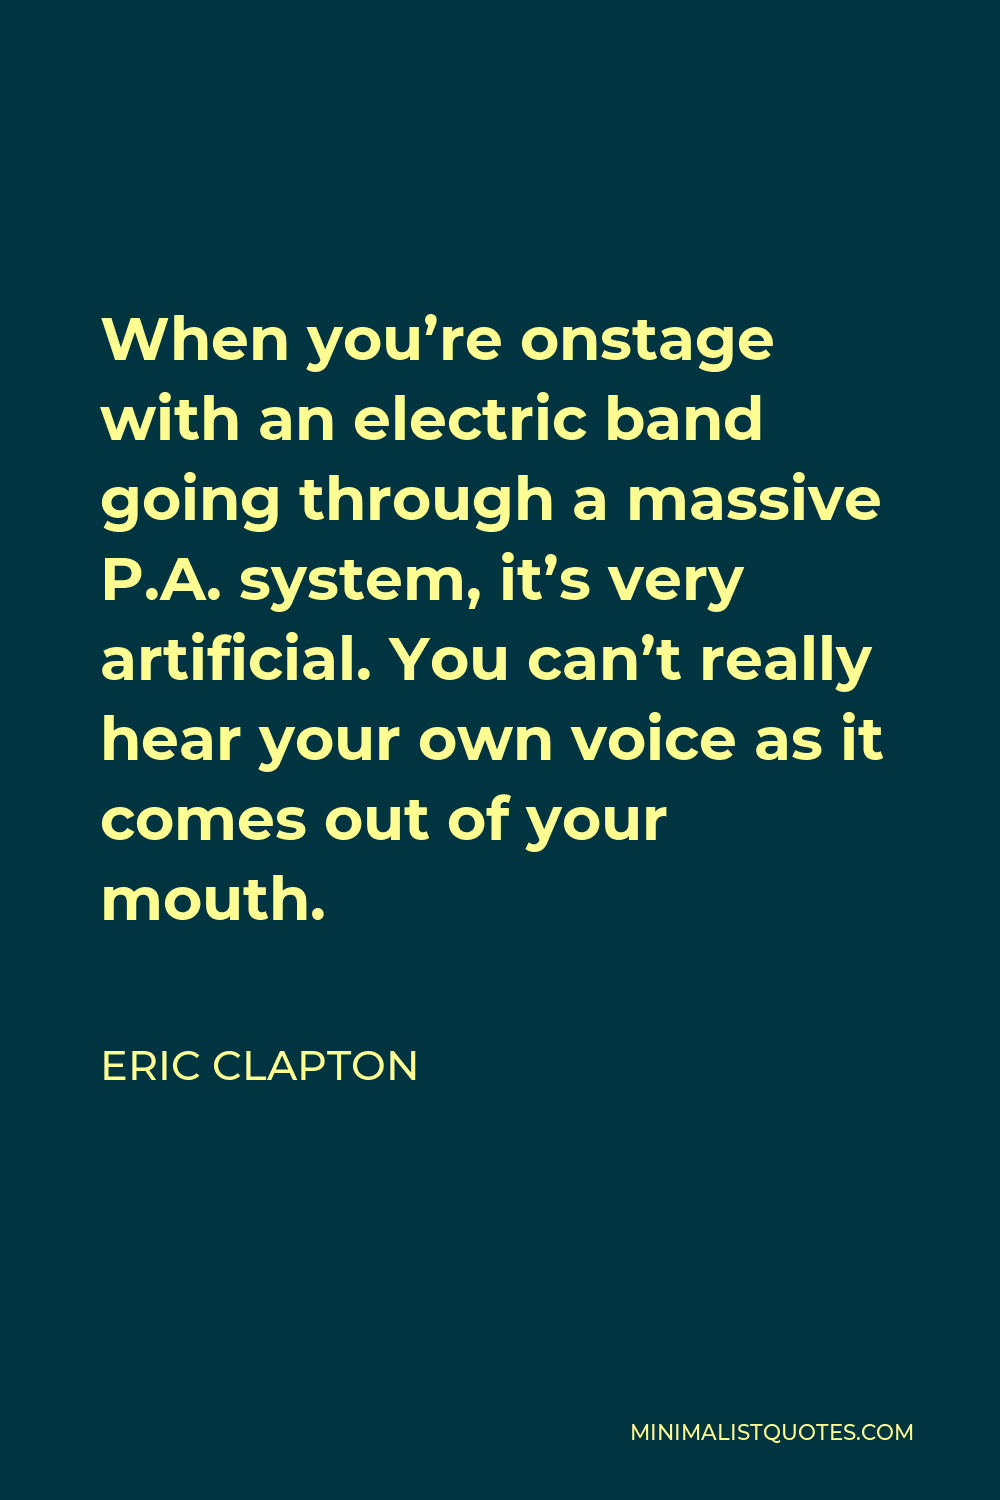 Eric Clapton Quote - When you’re onstage with an electric band going through a massive P.A. system, it’s very artificial. You can’t really hear your own voice as it comes out of your mouth.